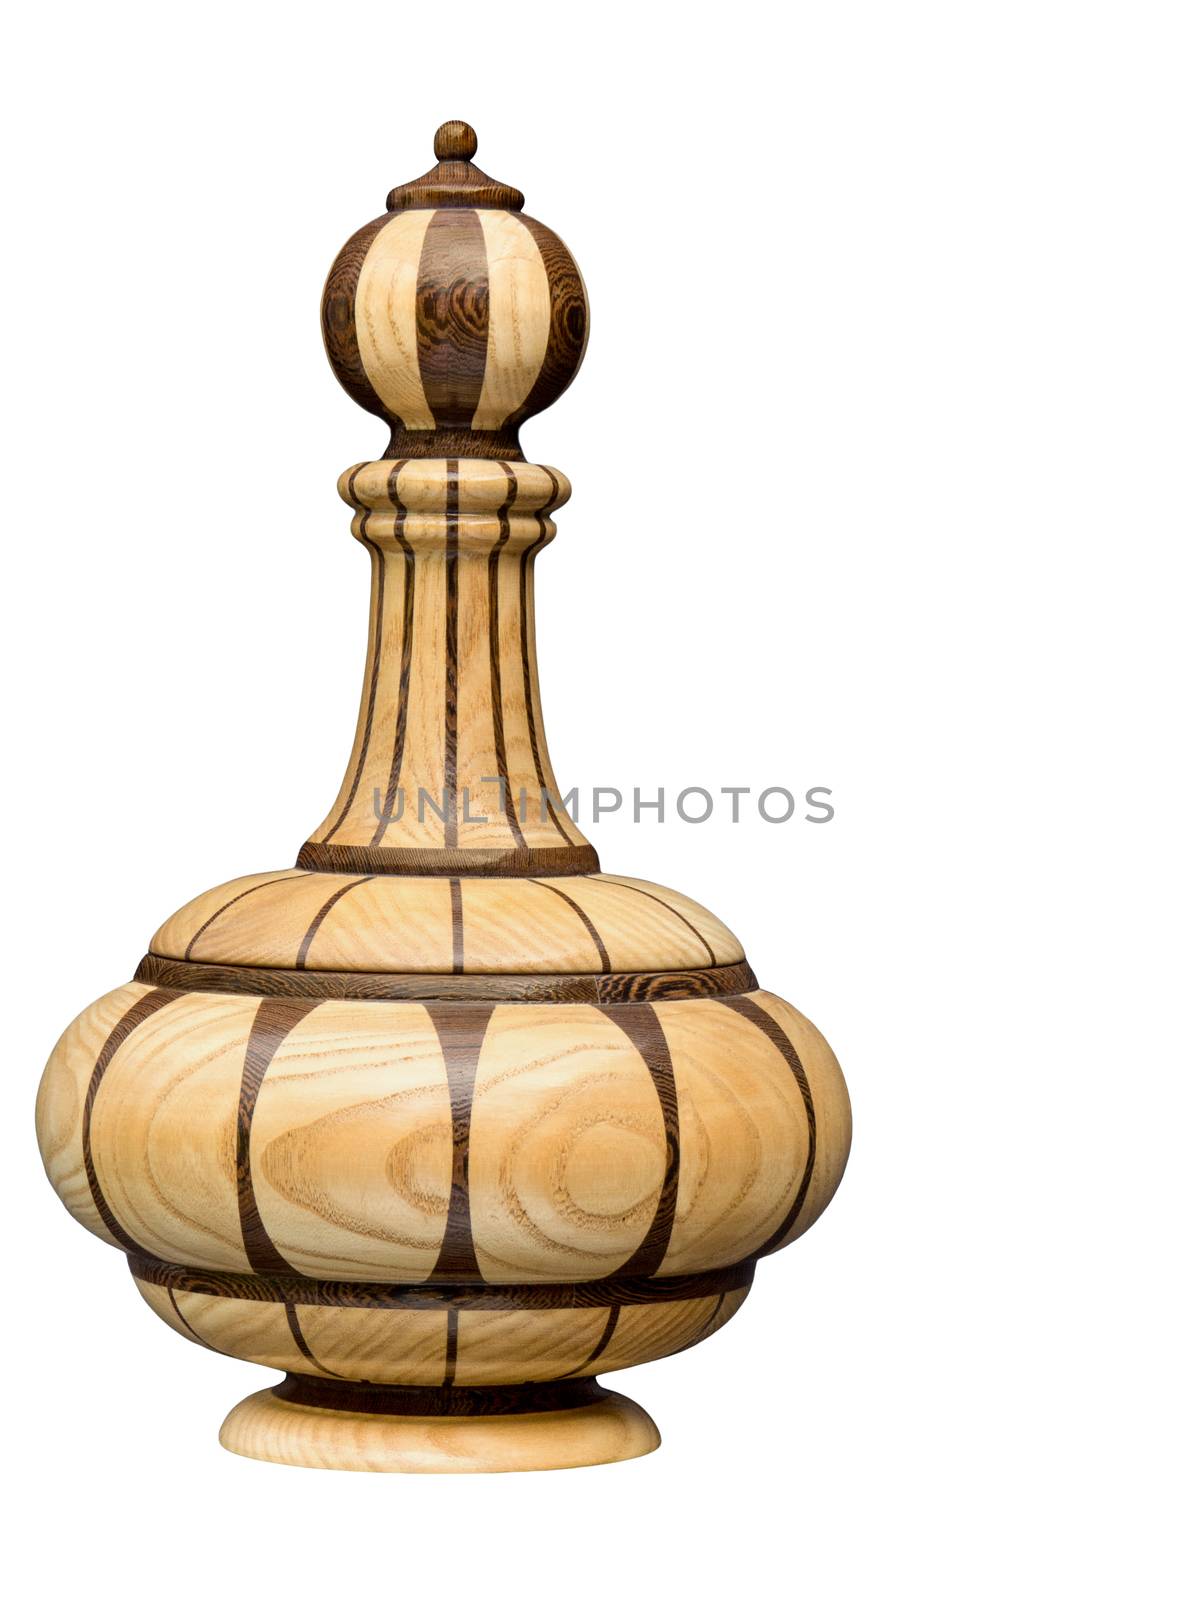 Wooden oriental pot isolated on white by BenSchonewille